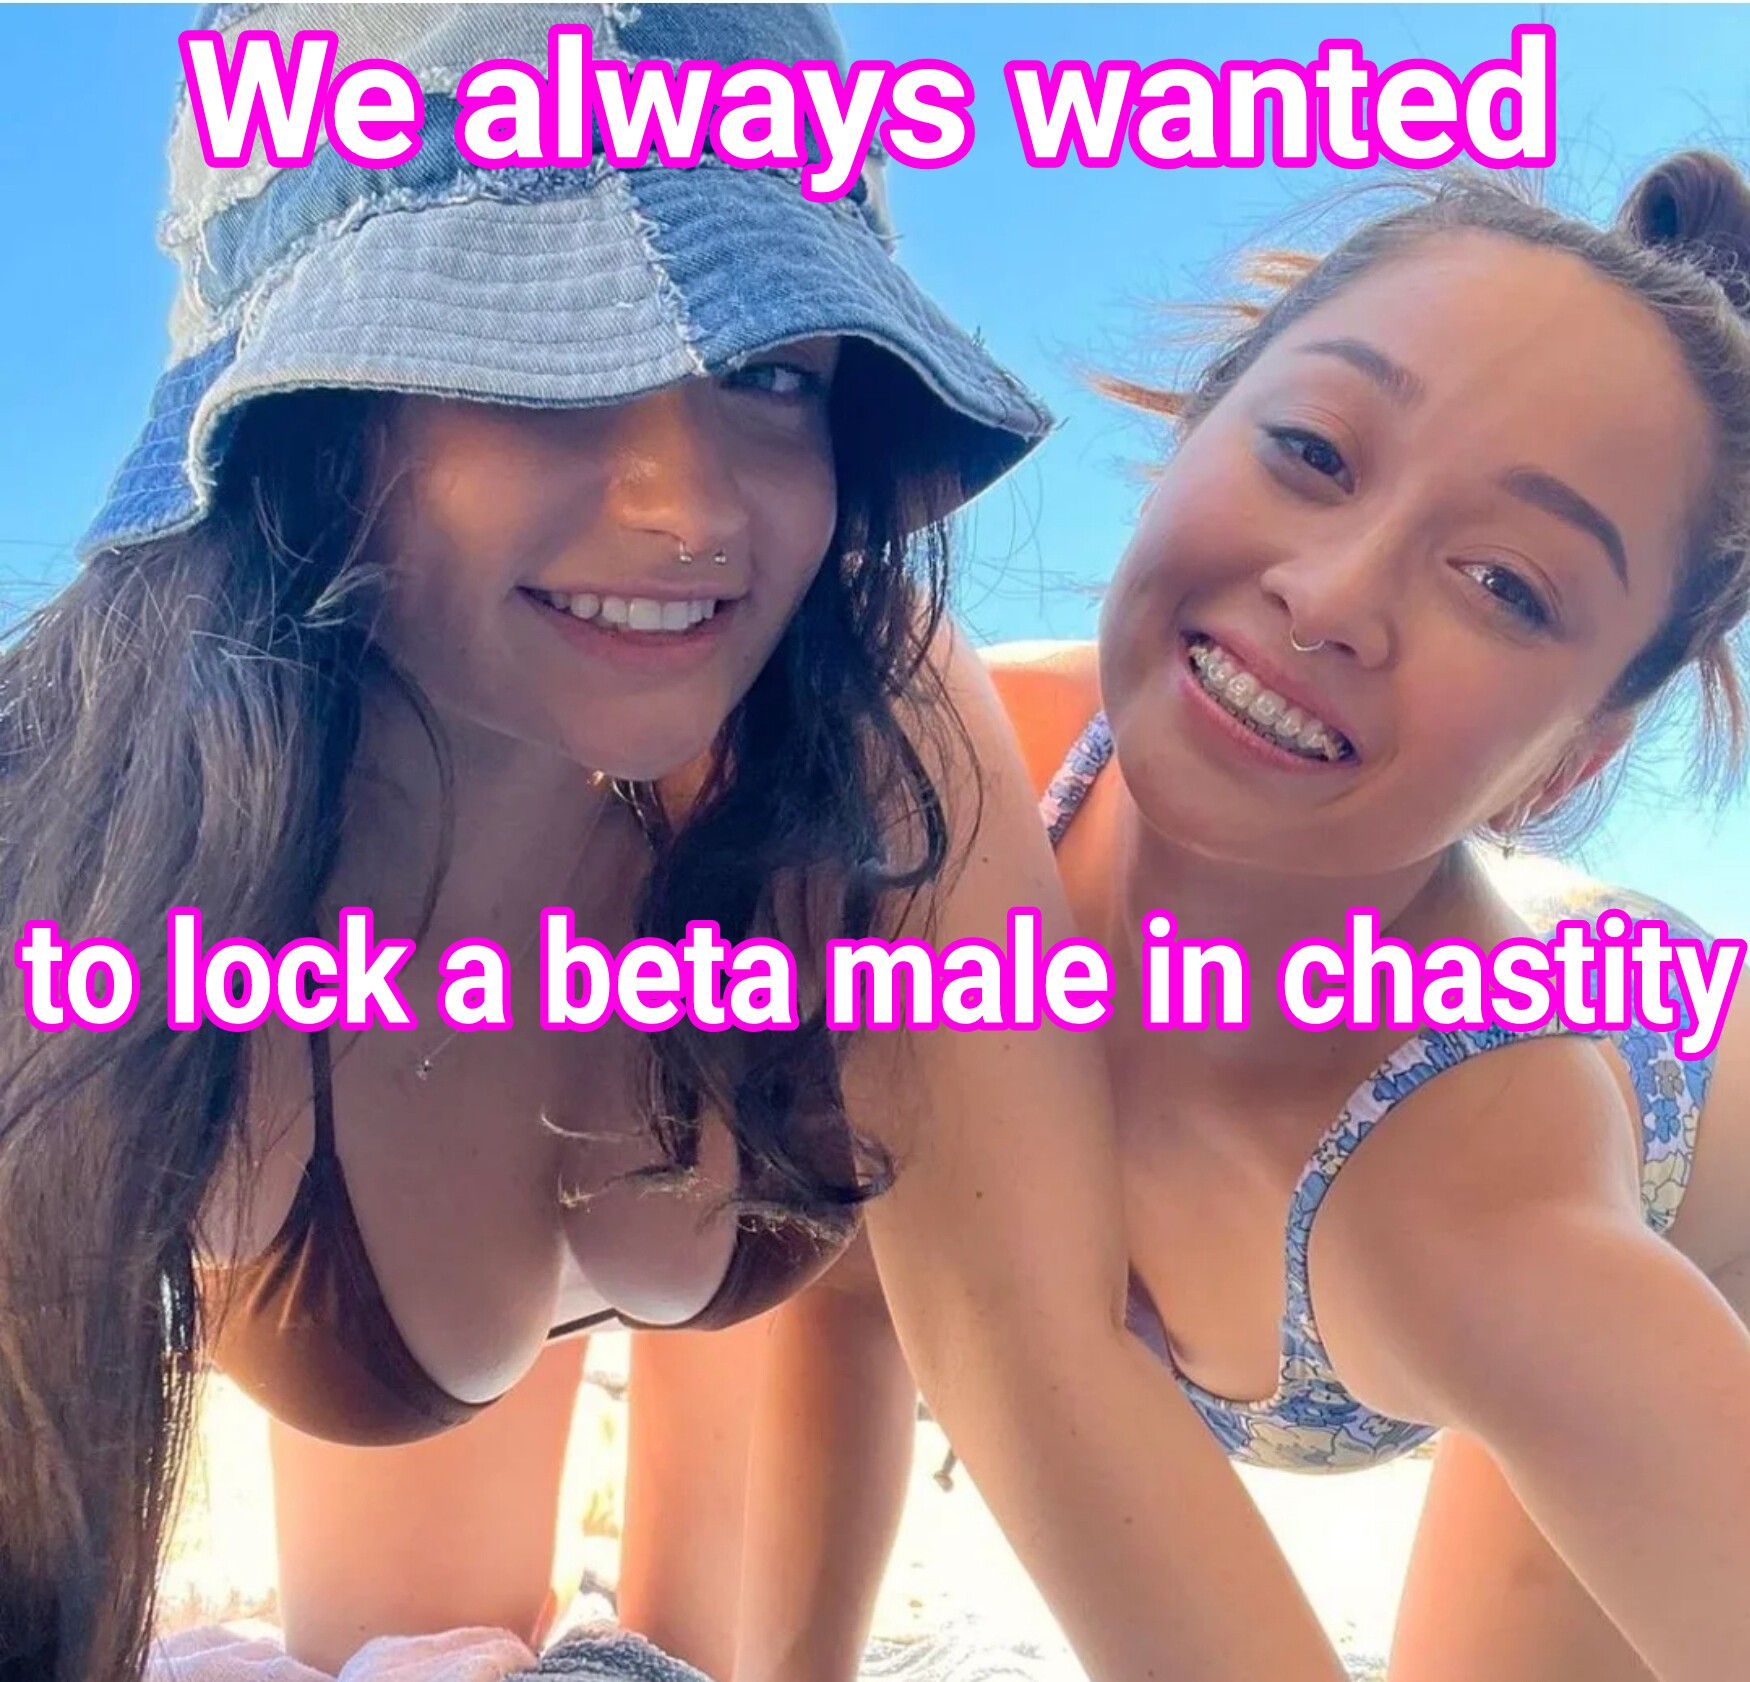 Locking up beta males in chastity pic